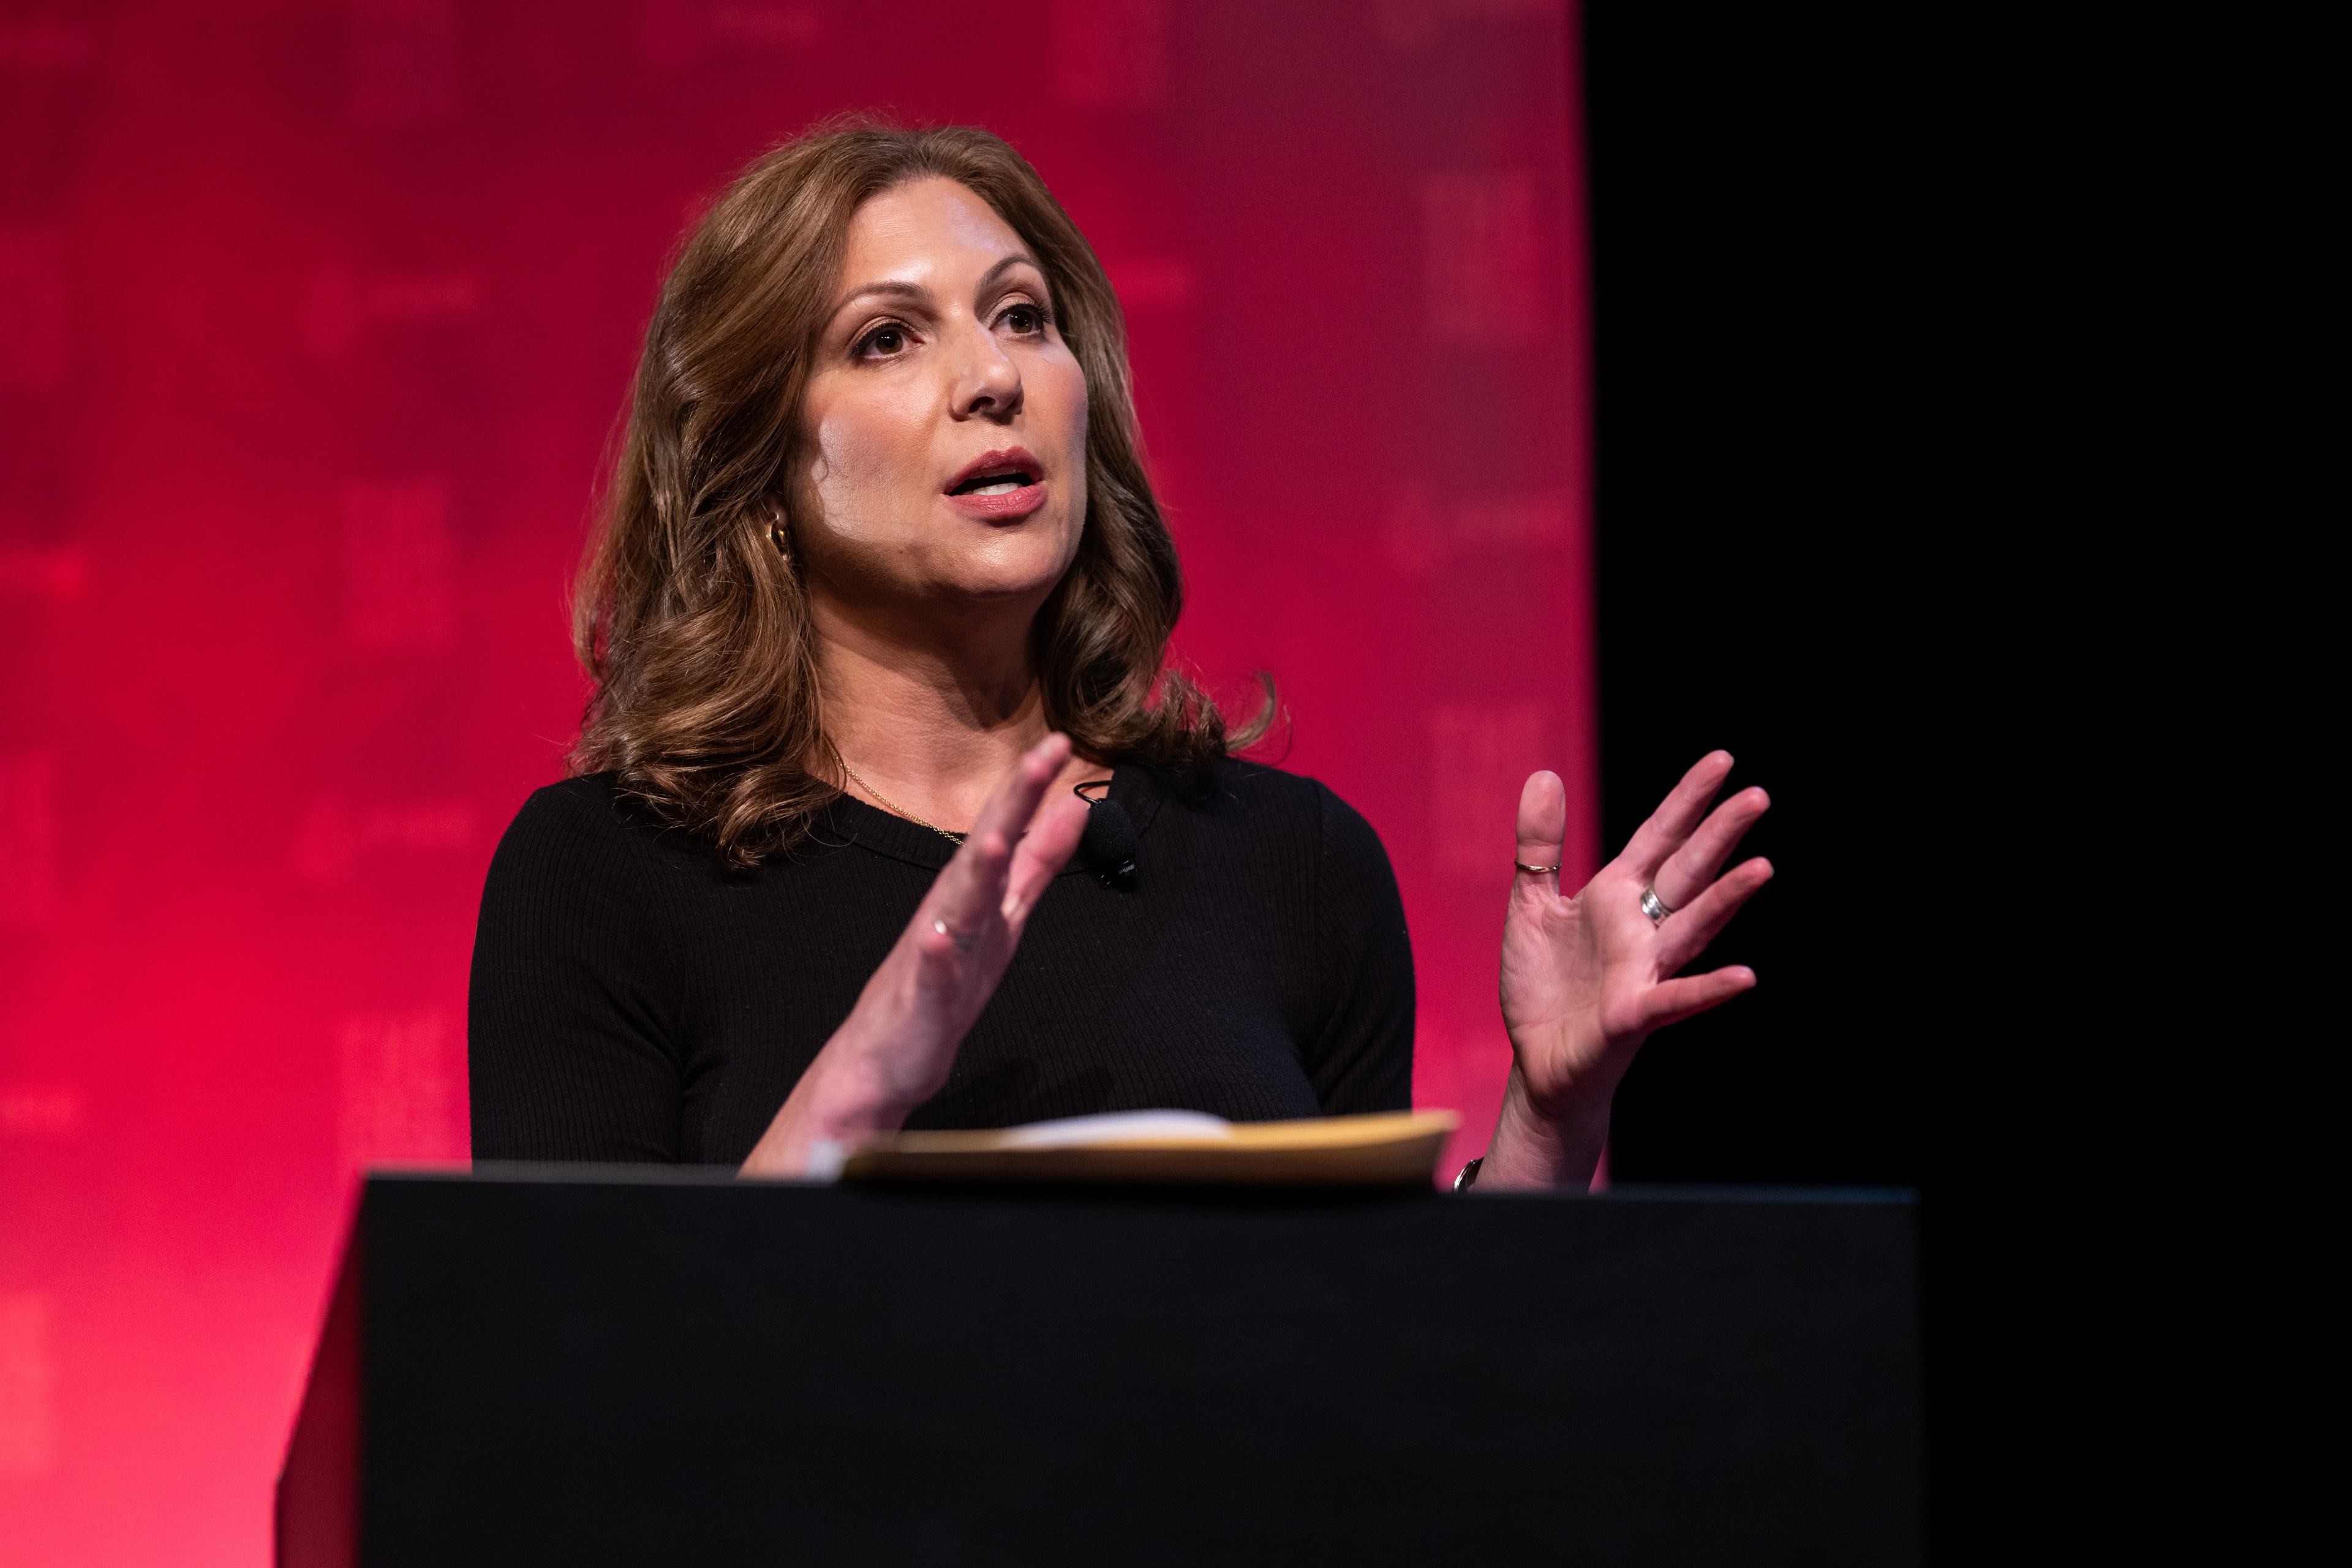 A woman with wavy brown hair is speaking passionately from behind a podium, gesturing with her hands. The background is red with a subtle pattern printed on it.